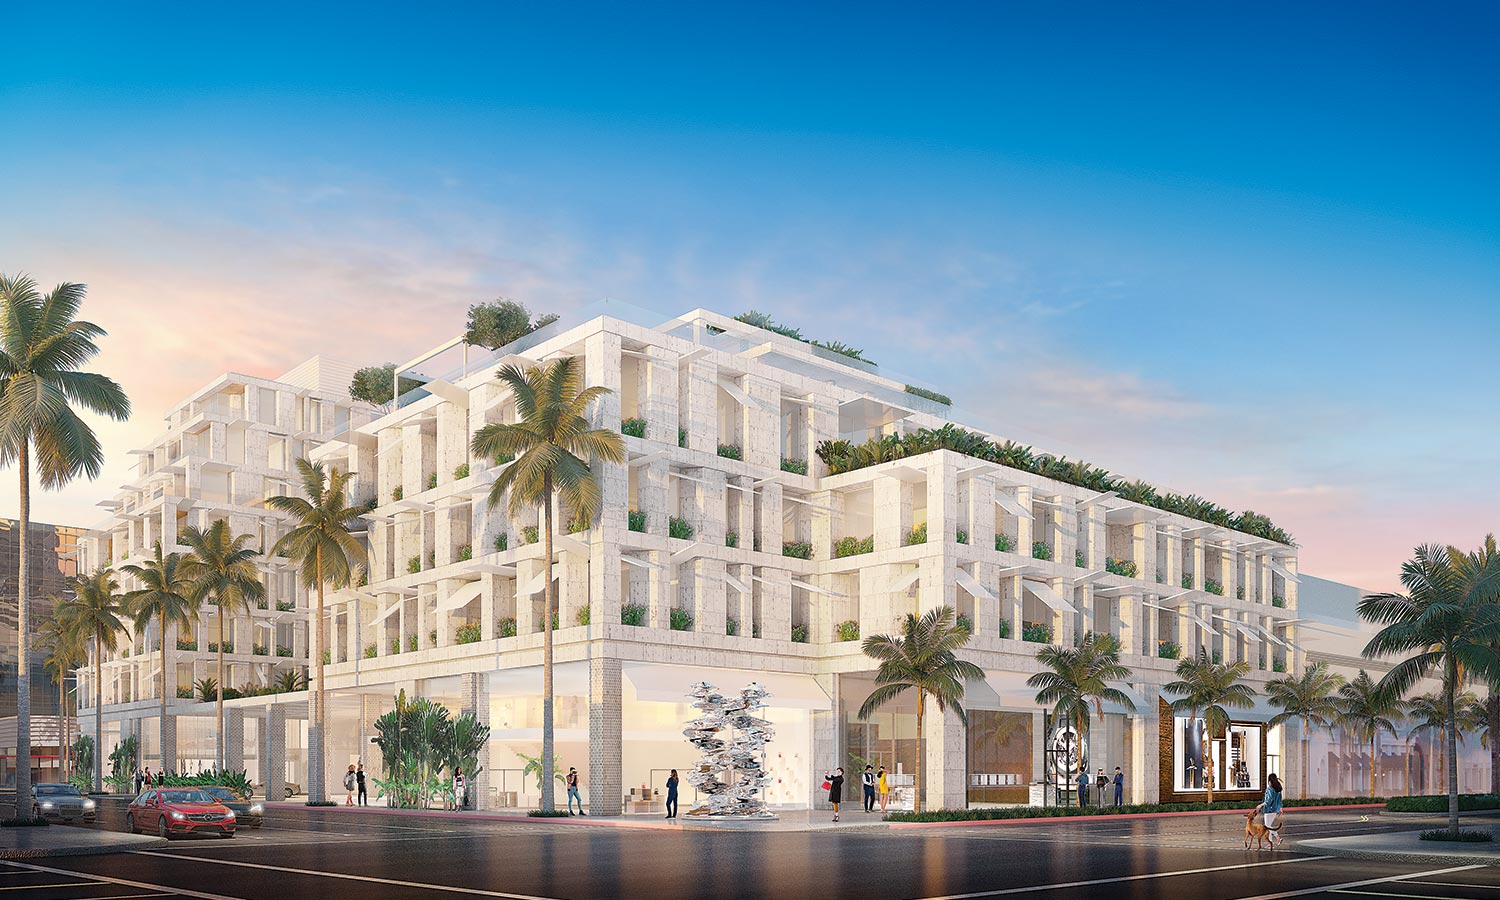 Planning Approves Dior French Restaurant on Rodeo Dr. - Beverly